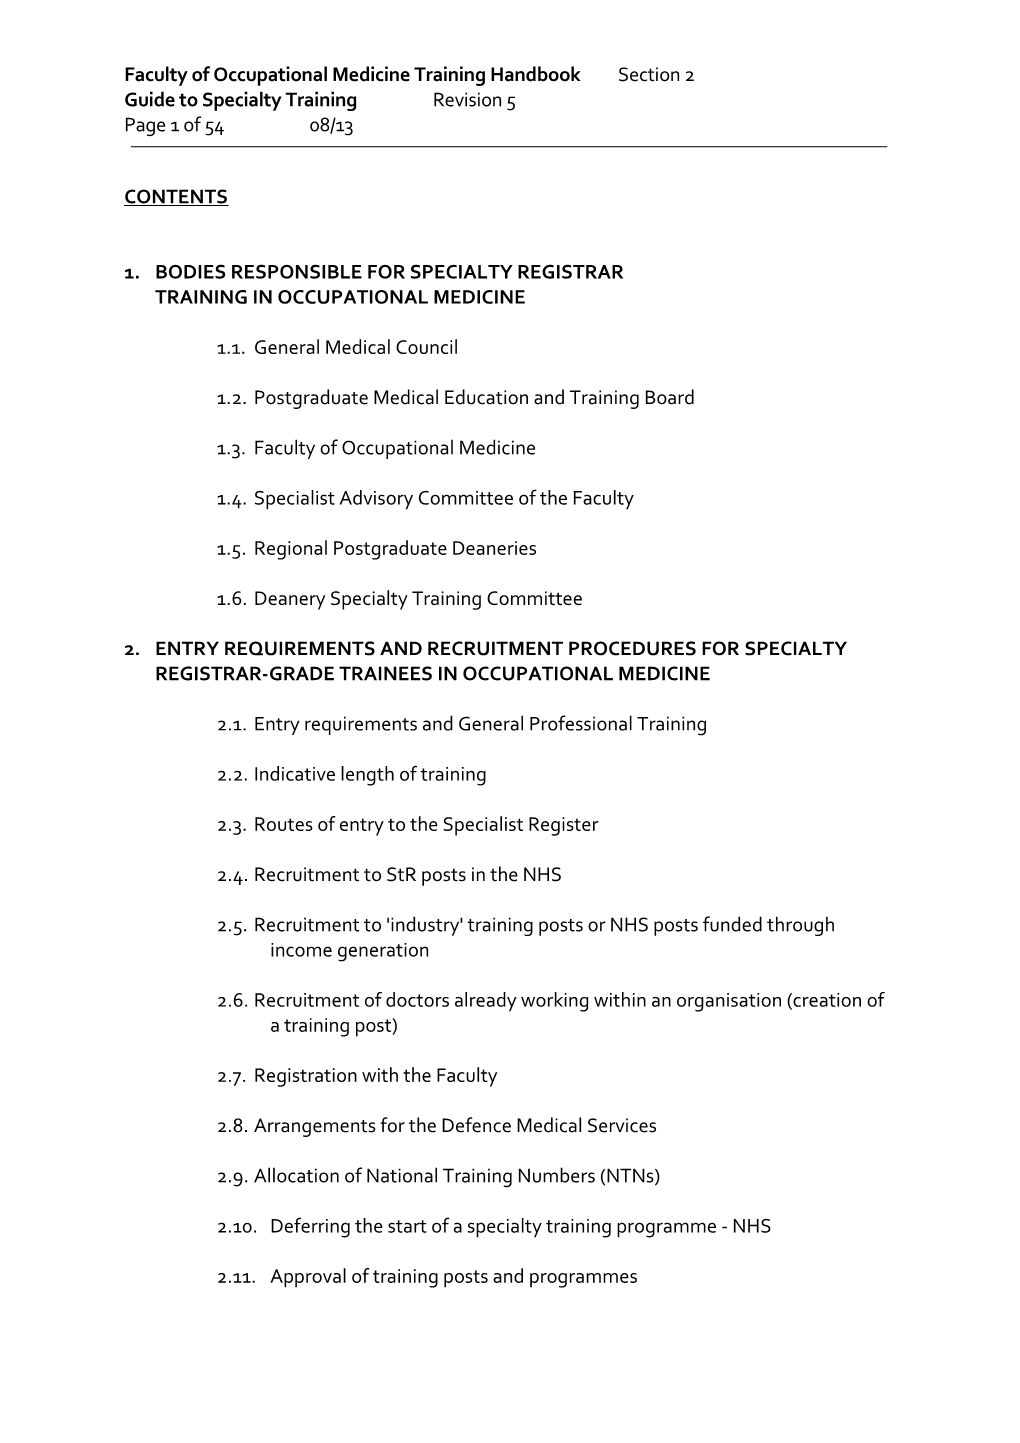 Faculty of Occupational Medicine Training Handbook Section 2